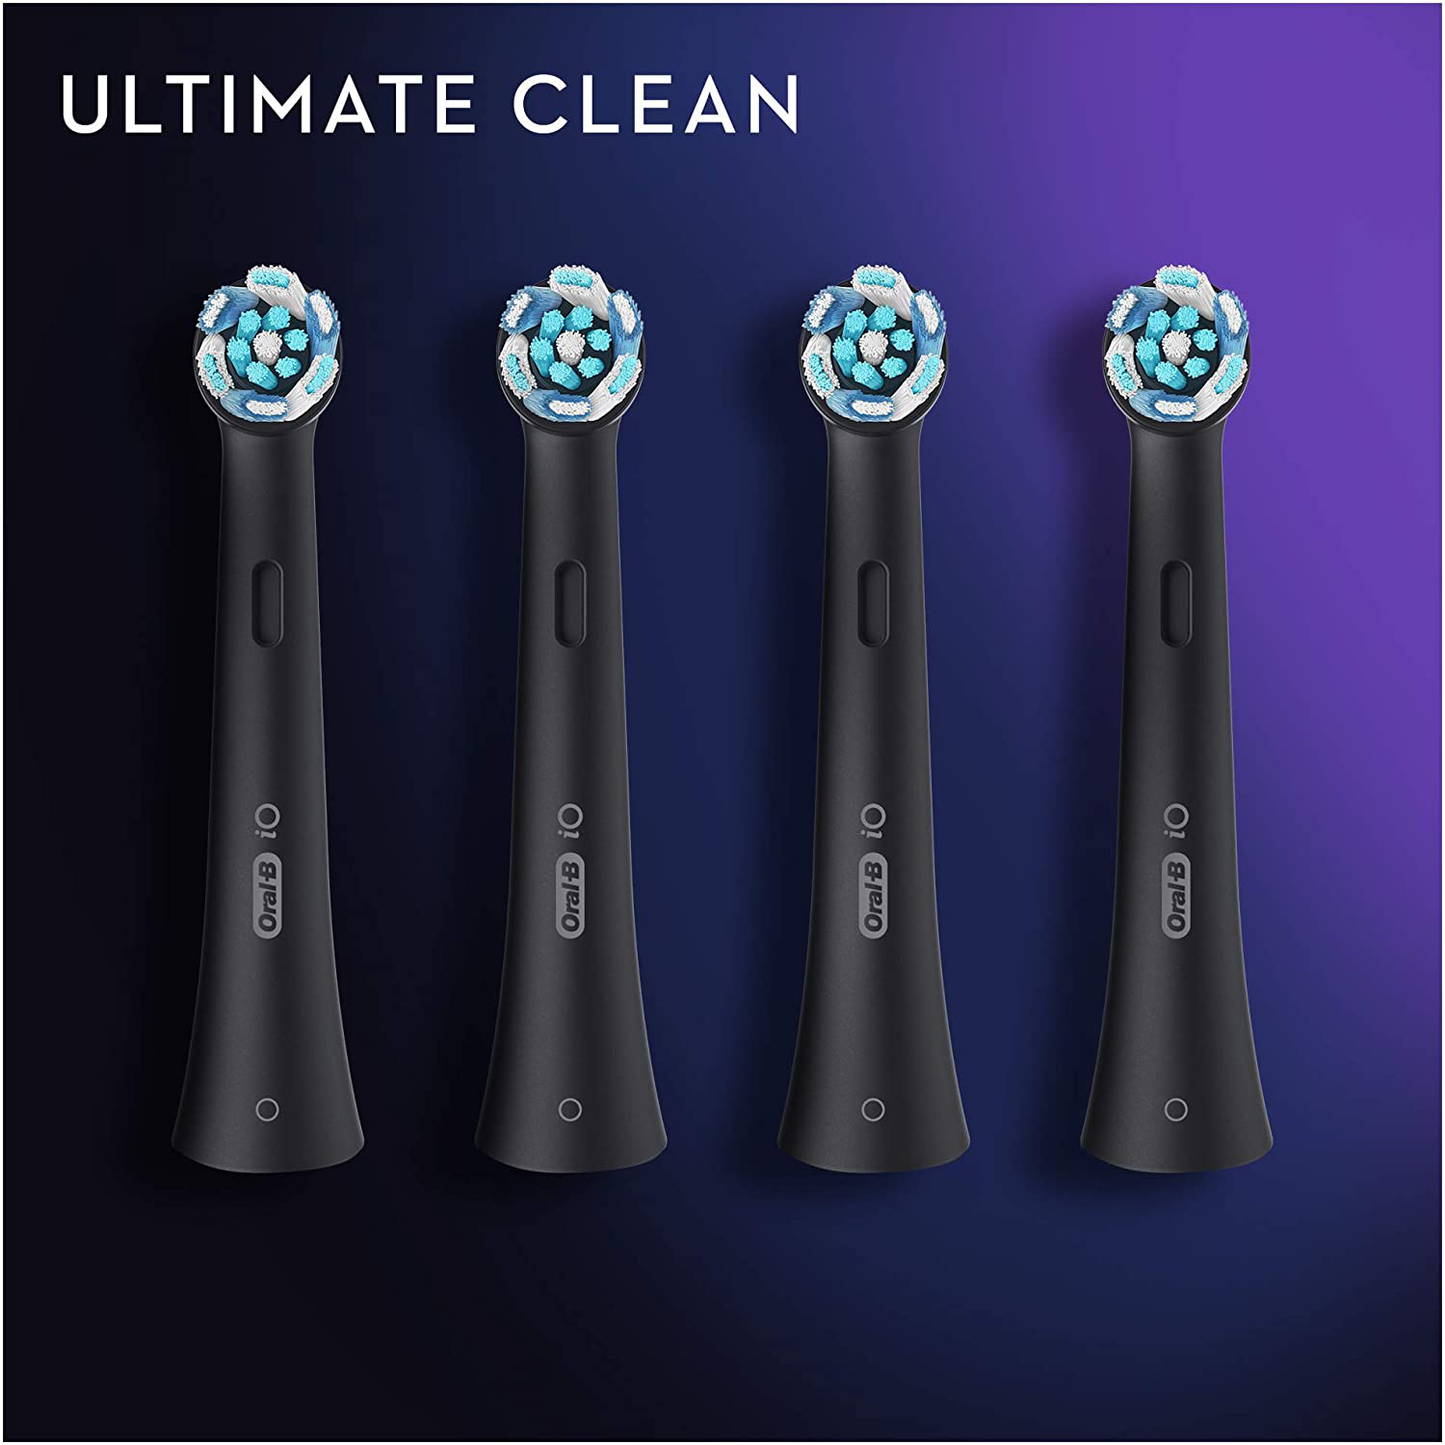 Oral-B iO Ultimate Clean Replacement Heads x4, Original Refill for Electric Toothbrush